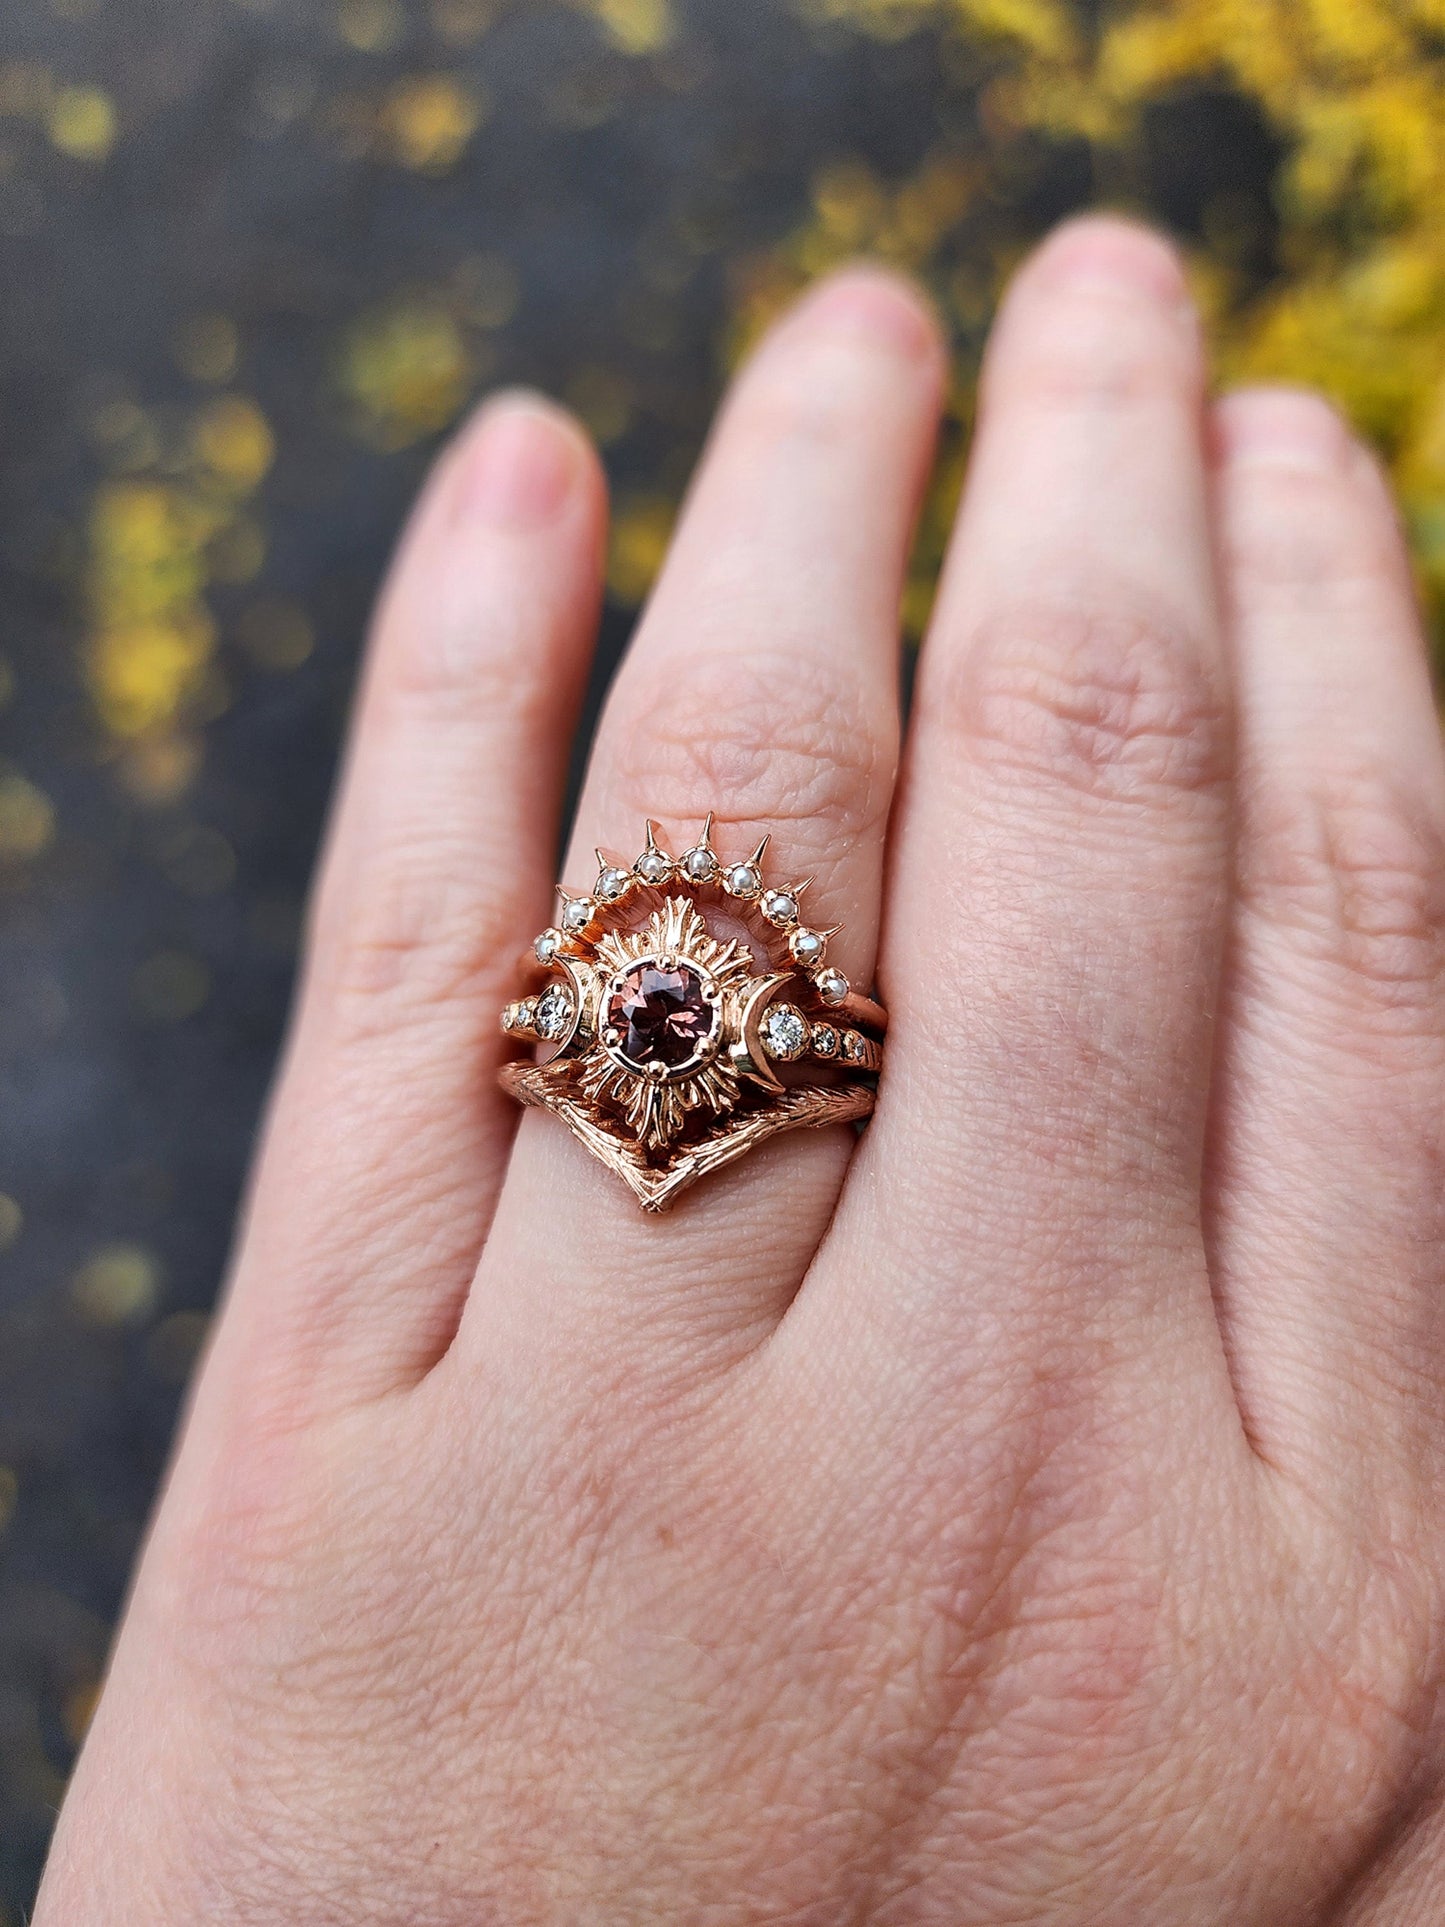 Ready to Ship Size 6 - 8- Oregon Sunstone Moon Fire 3 Ring Engagement Set - 14k Rose Gold - Pearl Sunray and Forest Chevron